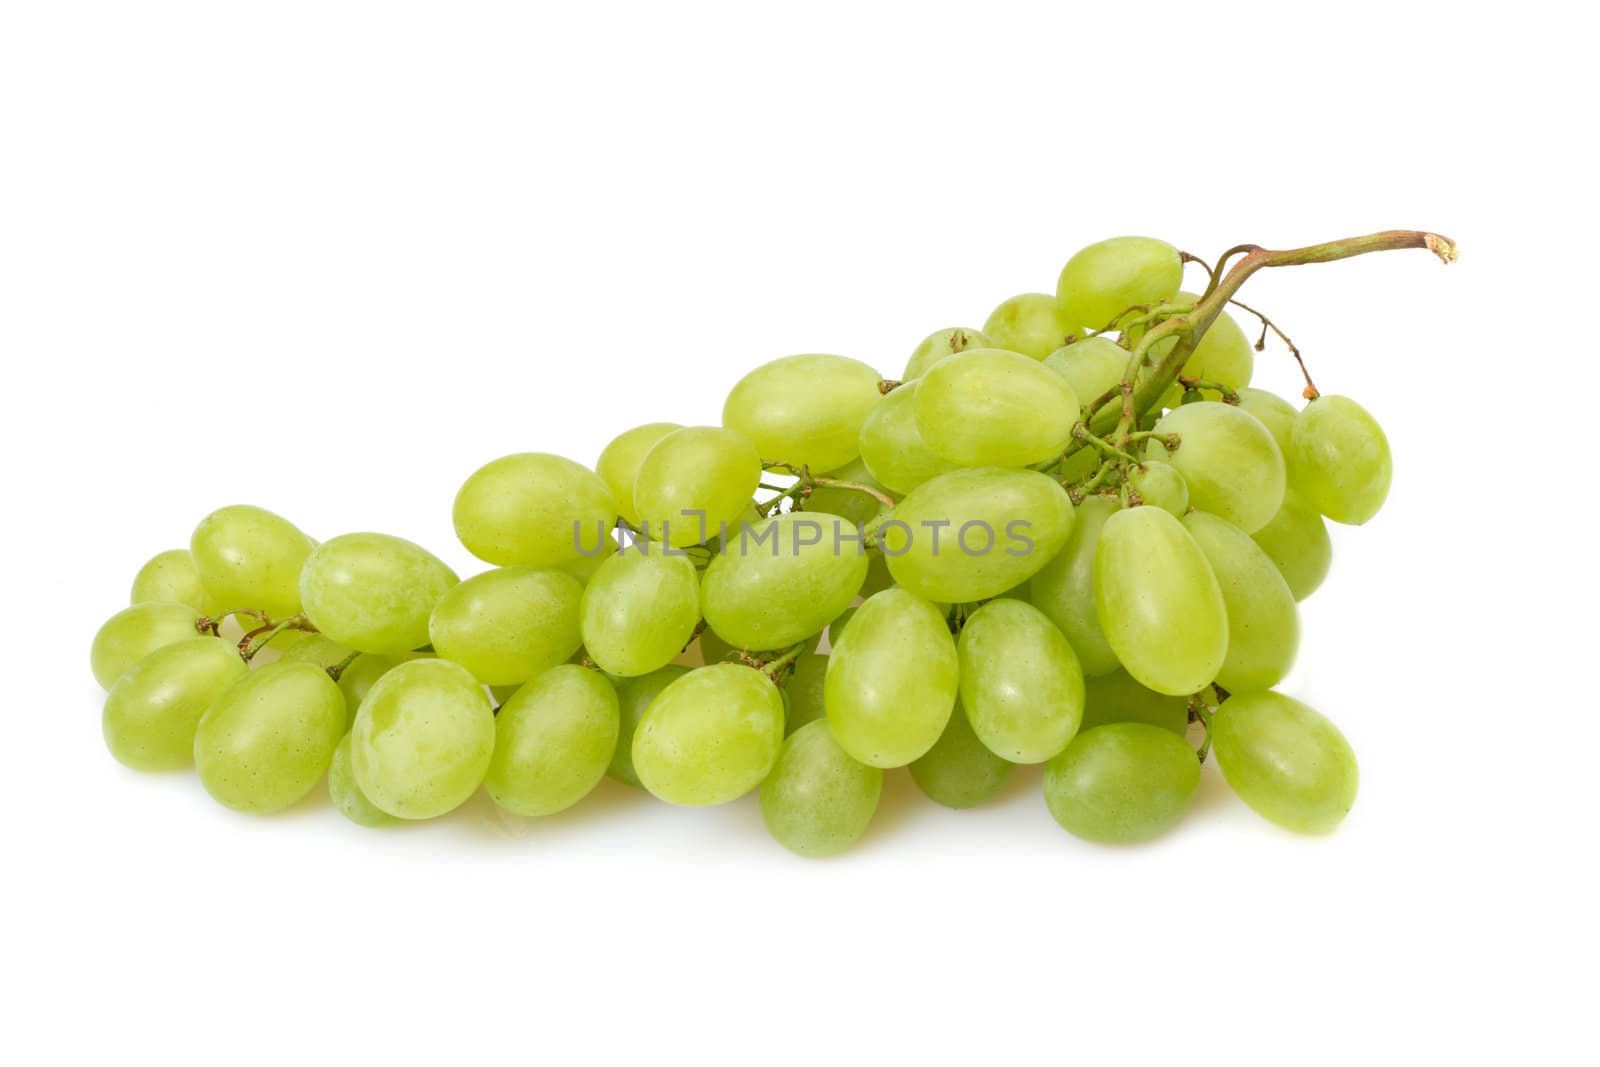 Branch of green grapes, photo on the white background